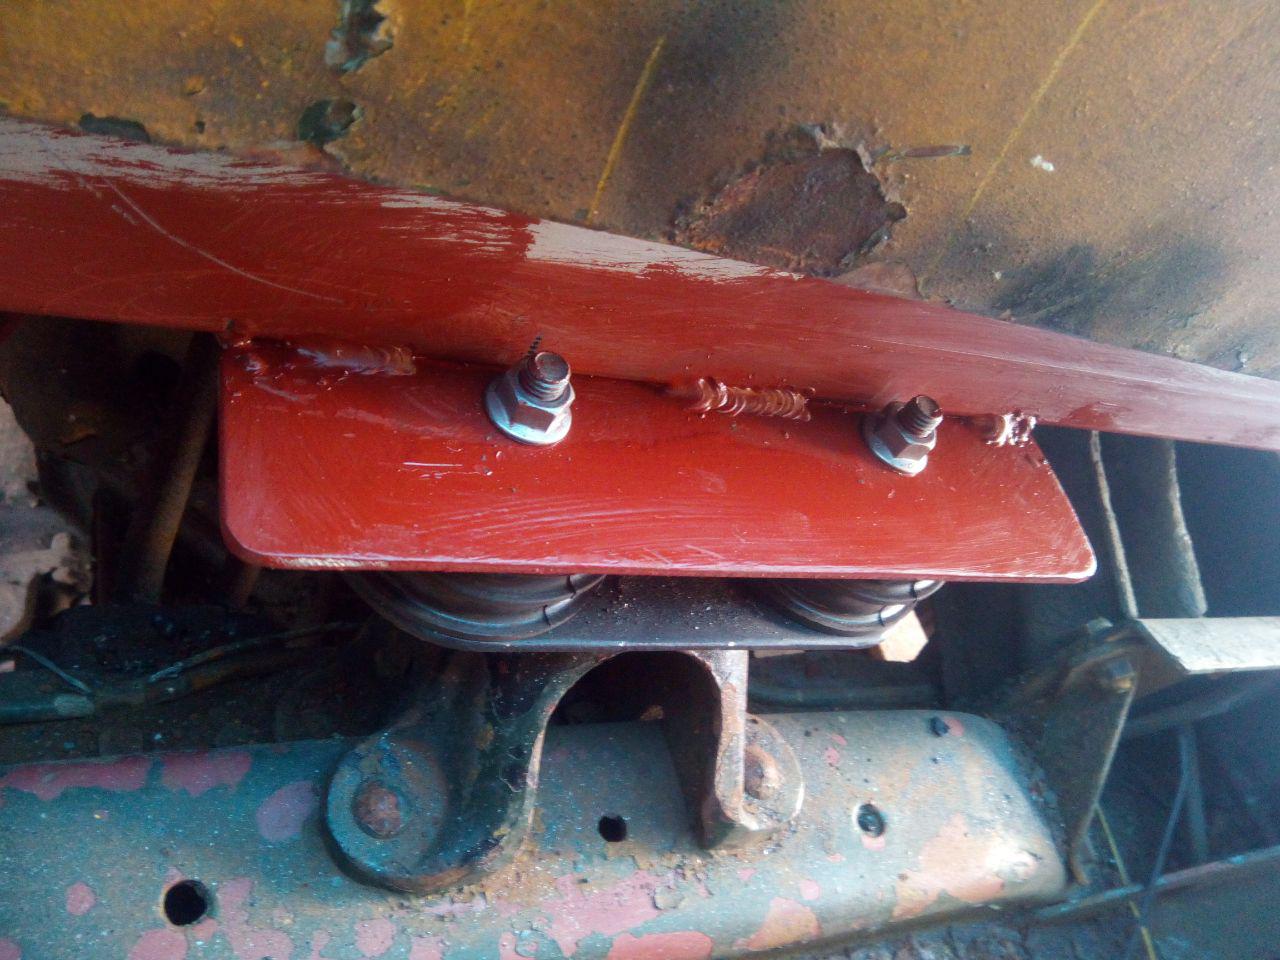 The new rear cab crossmember bracket, painted in red primer and
with the cab mount nuts tightened down.